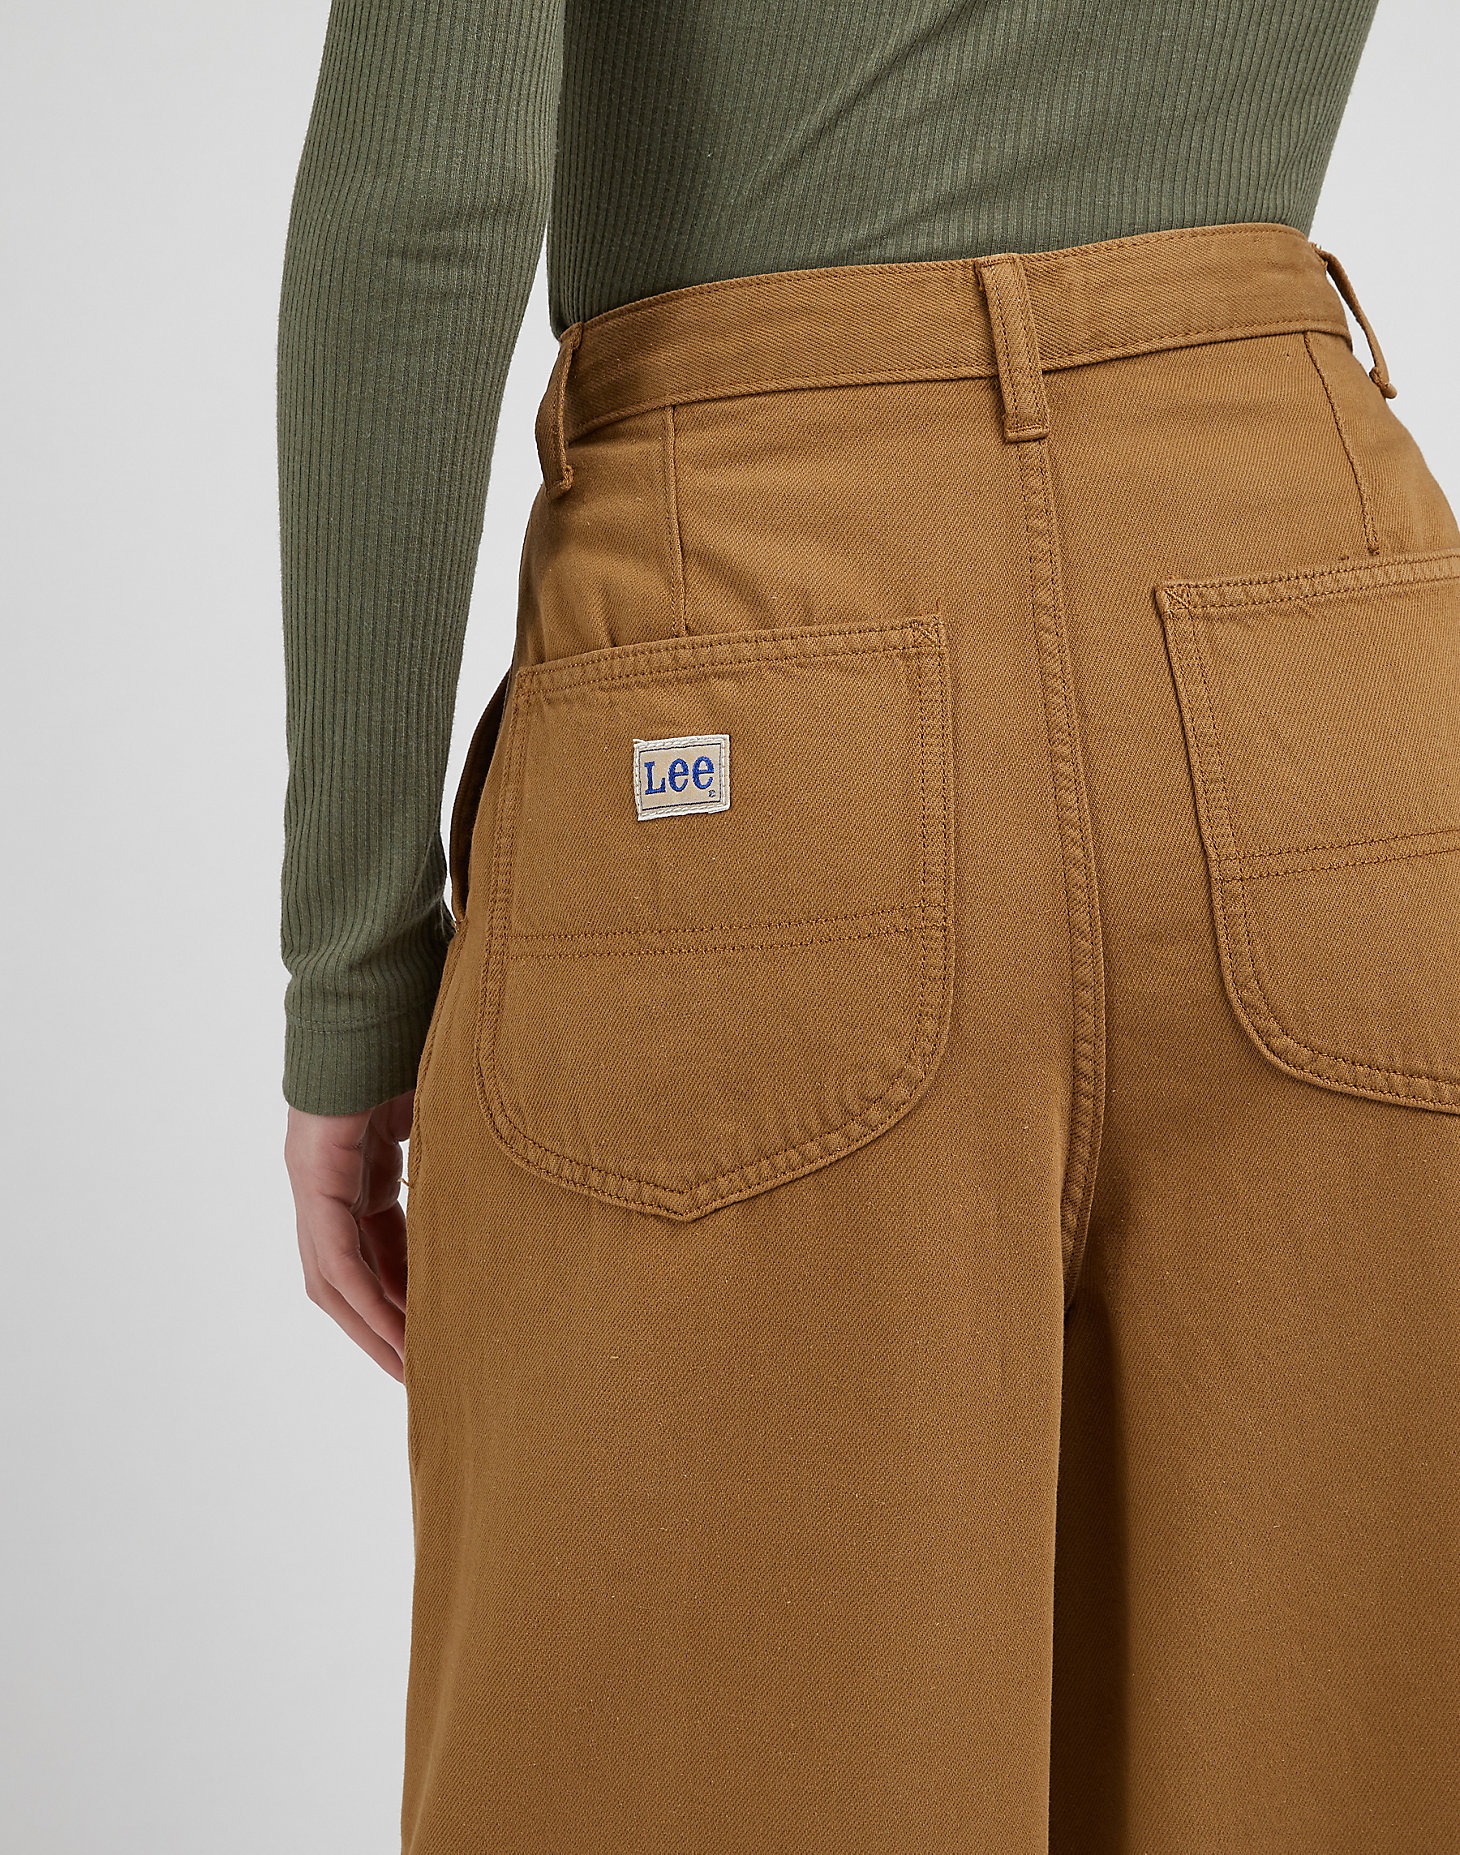 Relaxed Chino in Tumbleweed alternative view 4